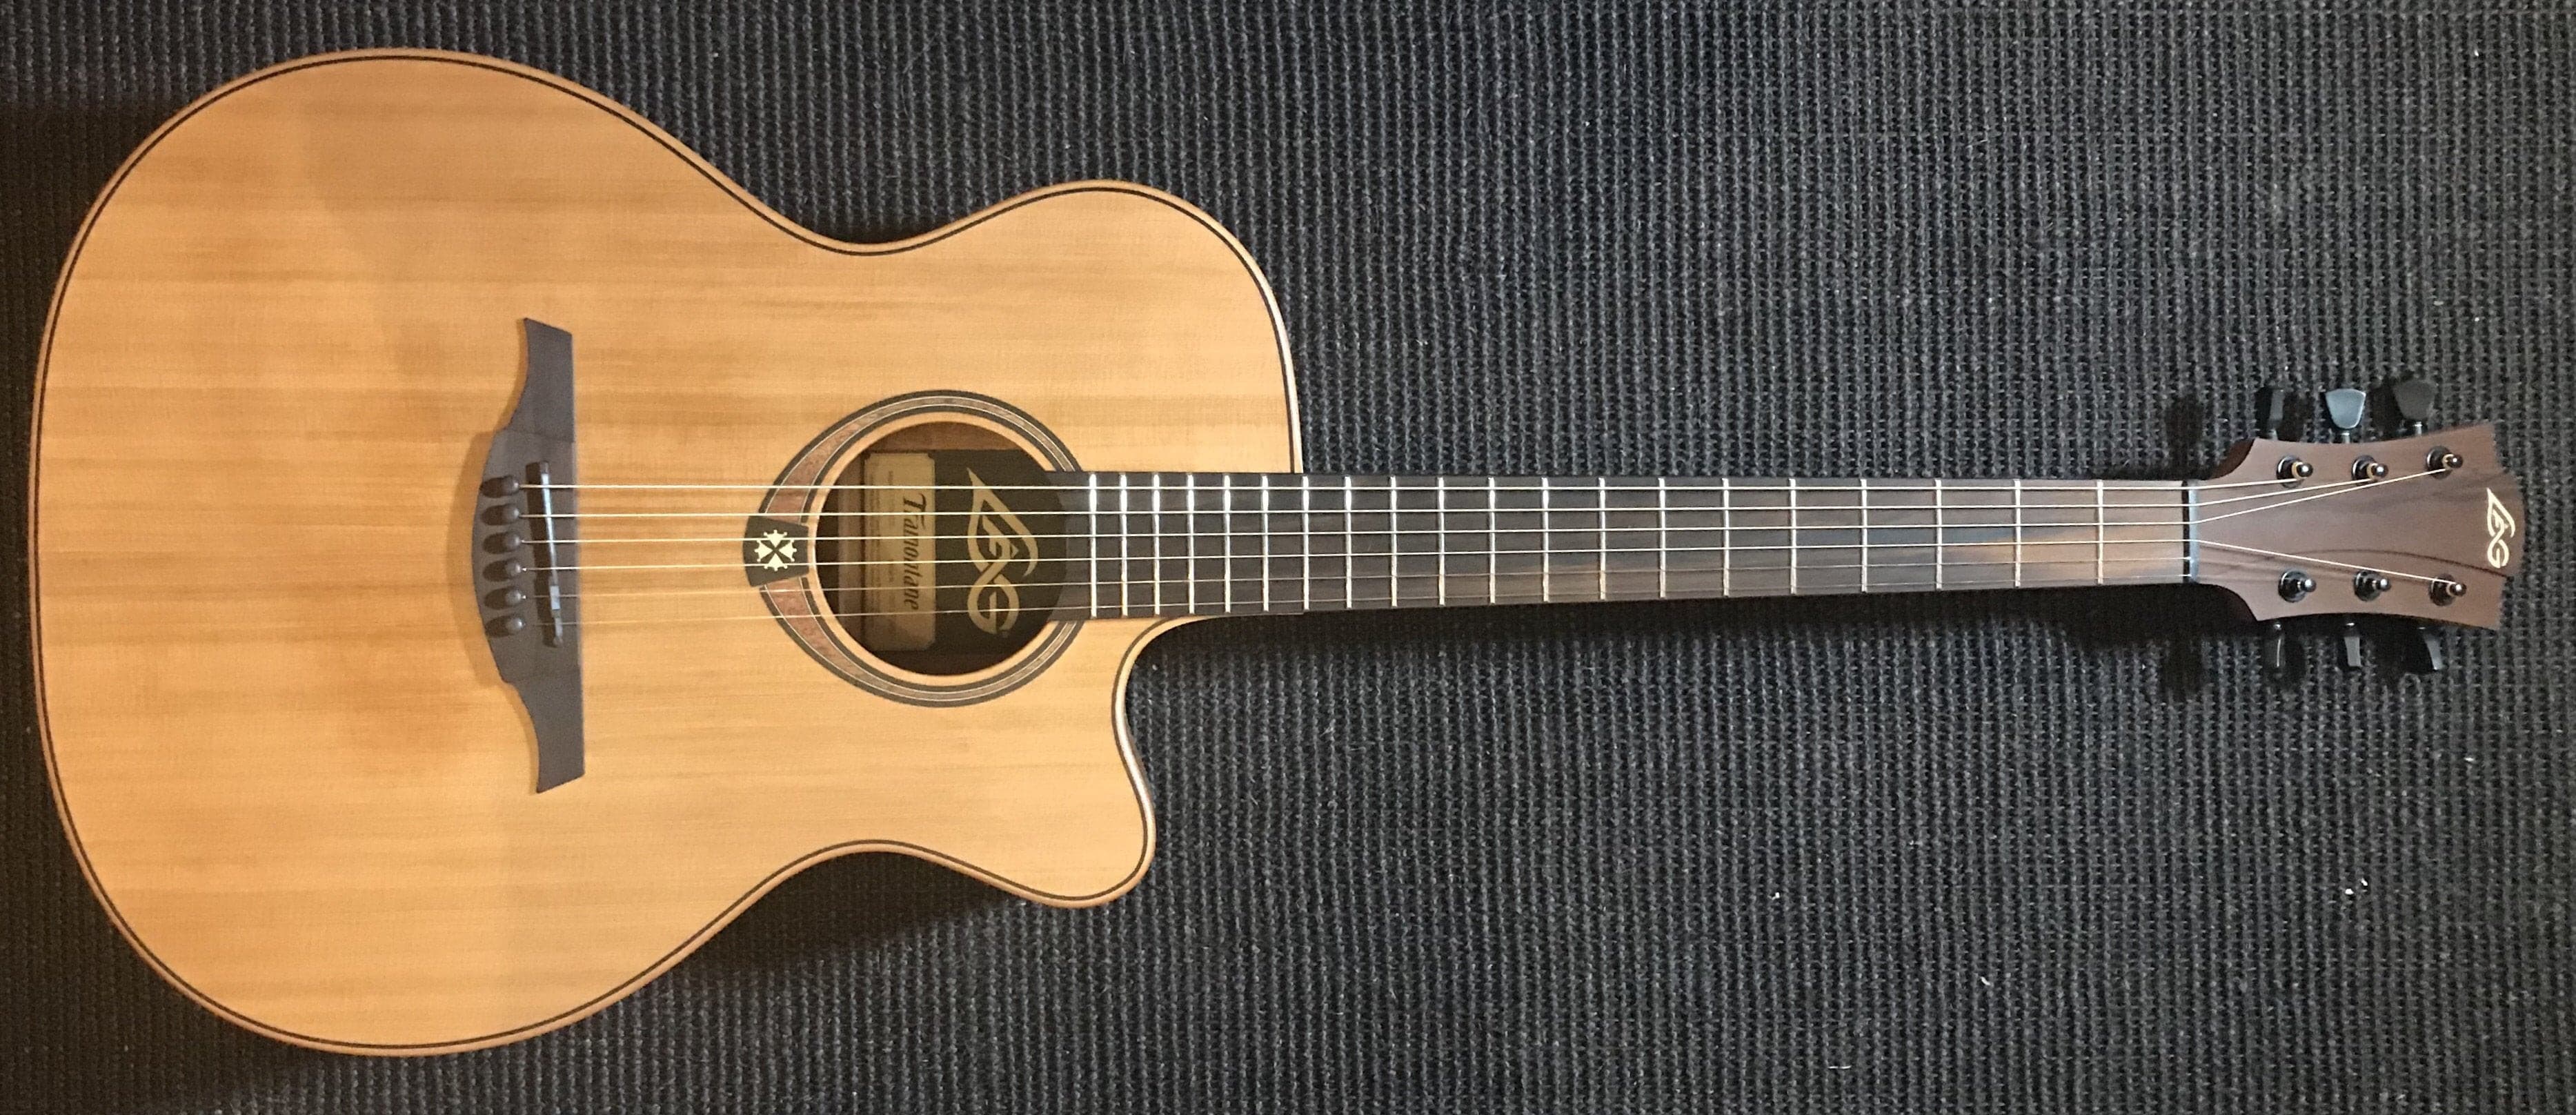 LAG TRAMONTANE 170 T170ACE AUDITORIUM CUTAWAY ELECTRO, Electro Acoustic Guitar for sale at Richards Guitars.